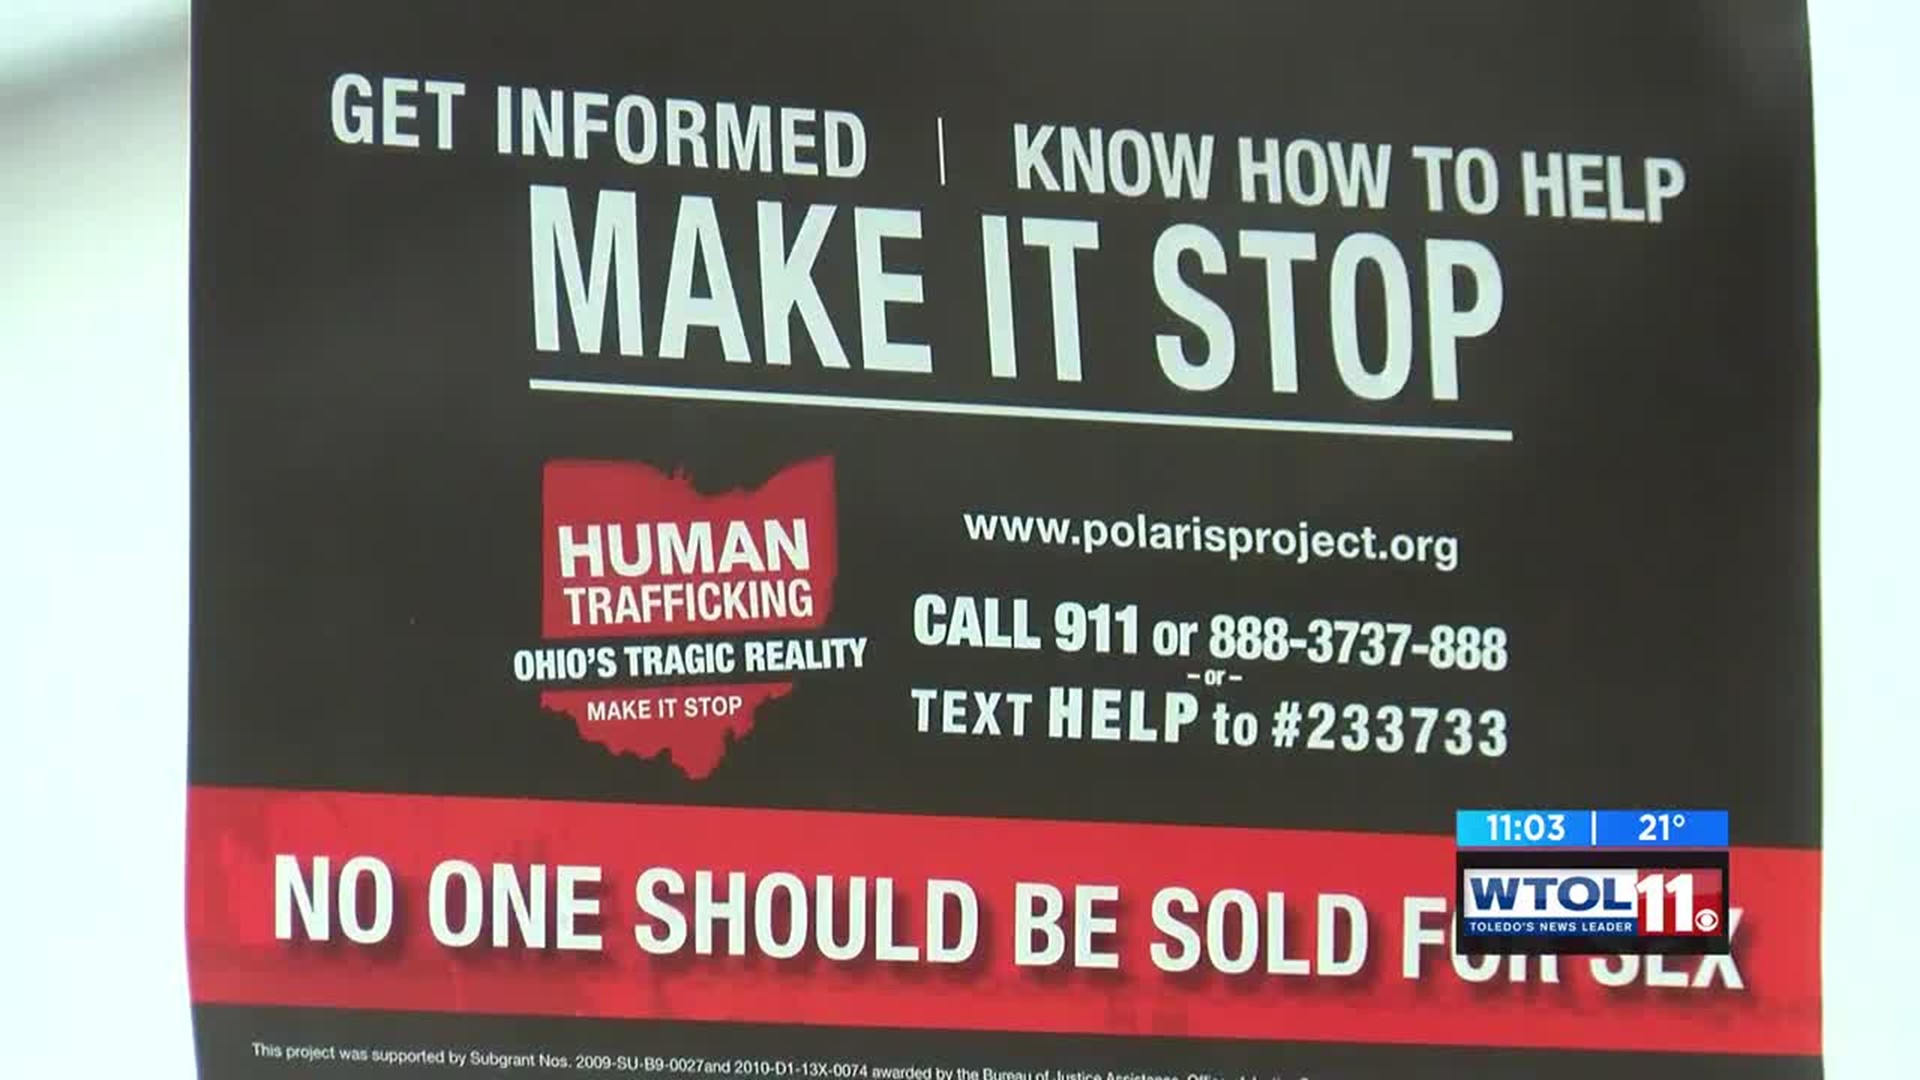 Fighting back against human trafficking together